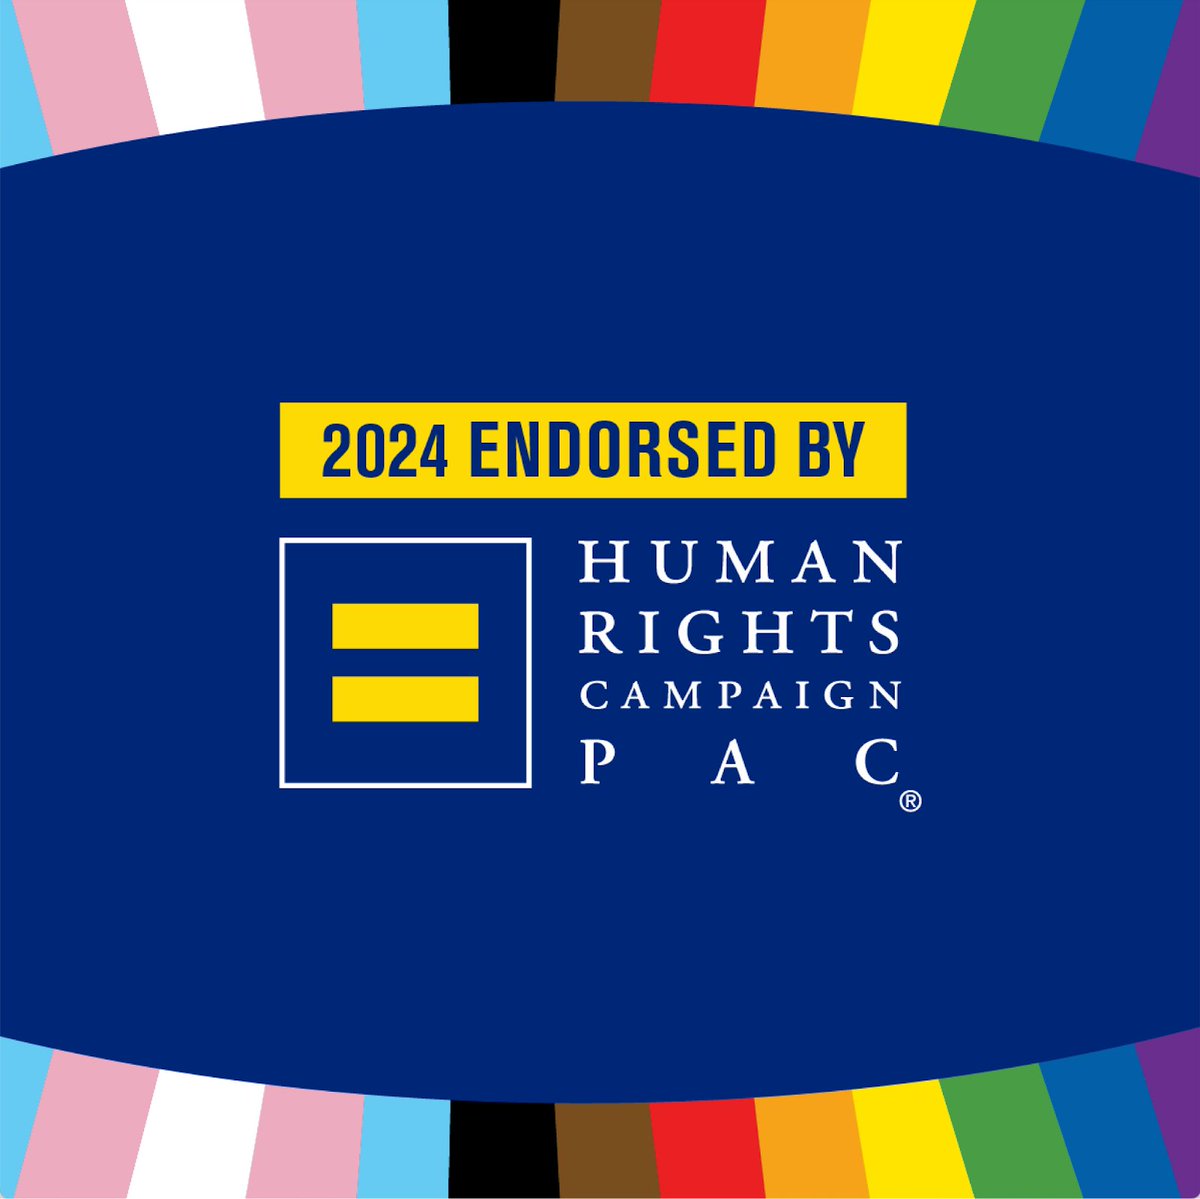 I'm thrilled to share that I've received the endorsement of the Human Rights Campaign! As a fierce advocate for equality and justice, I stand with the LGBTQ+ community in fighting for a world where everyone can live openly and without fear.